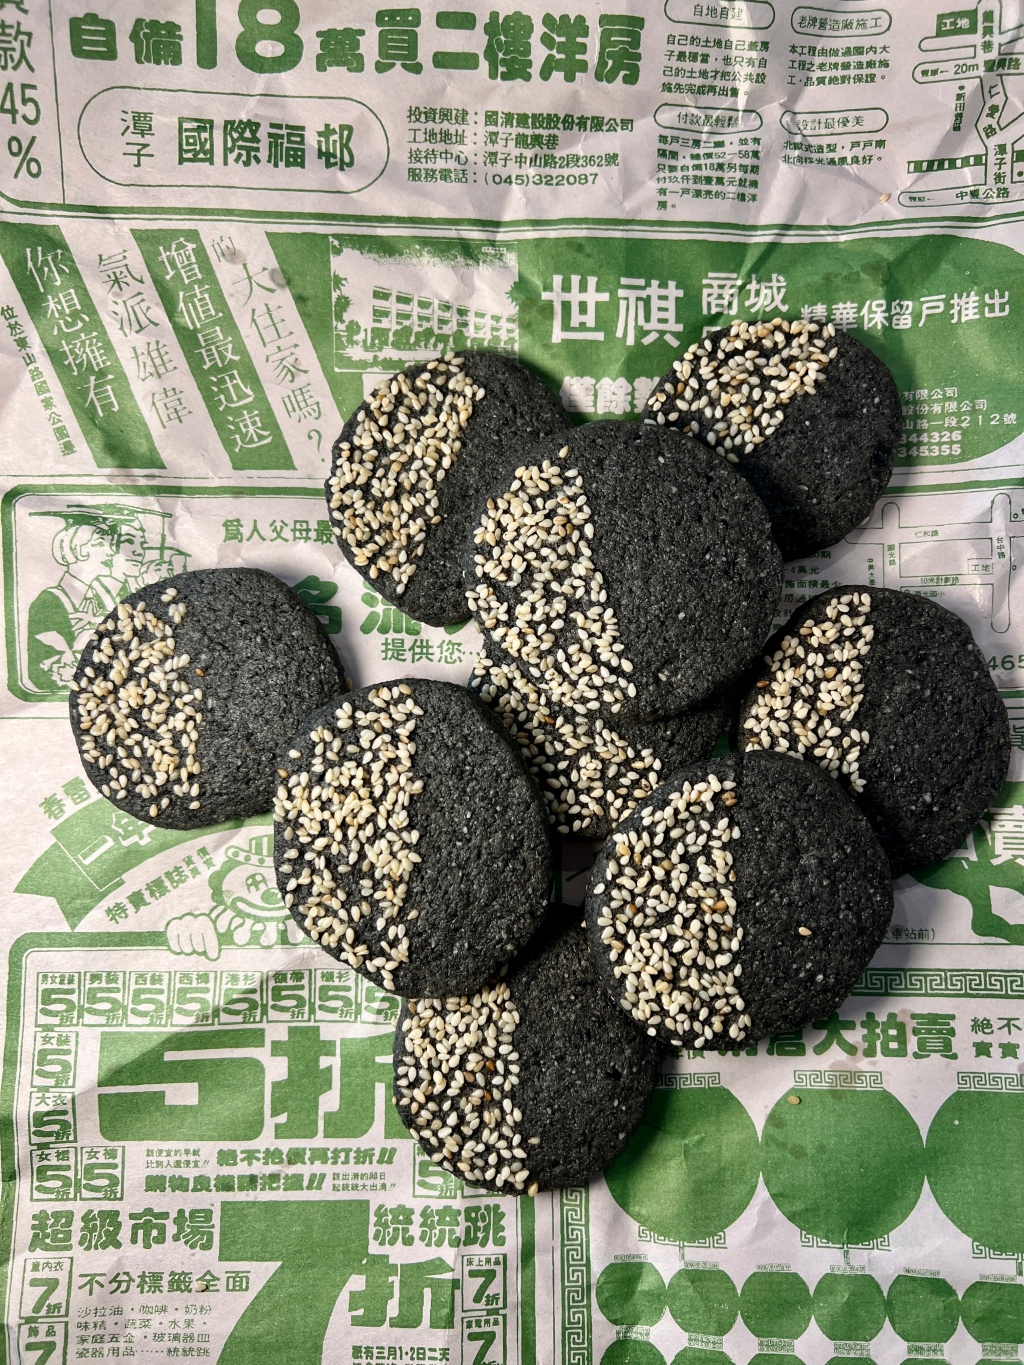 black sesame shortbread from New York Times Cooking